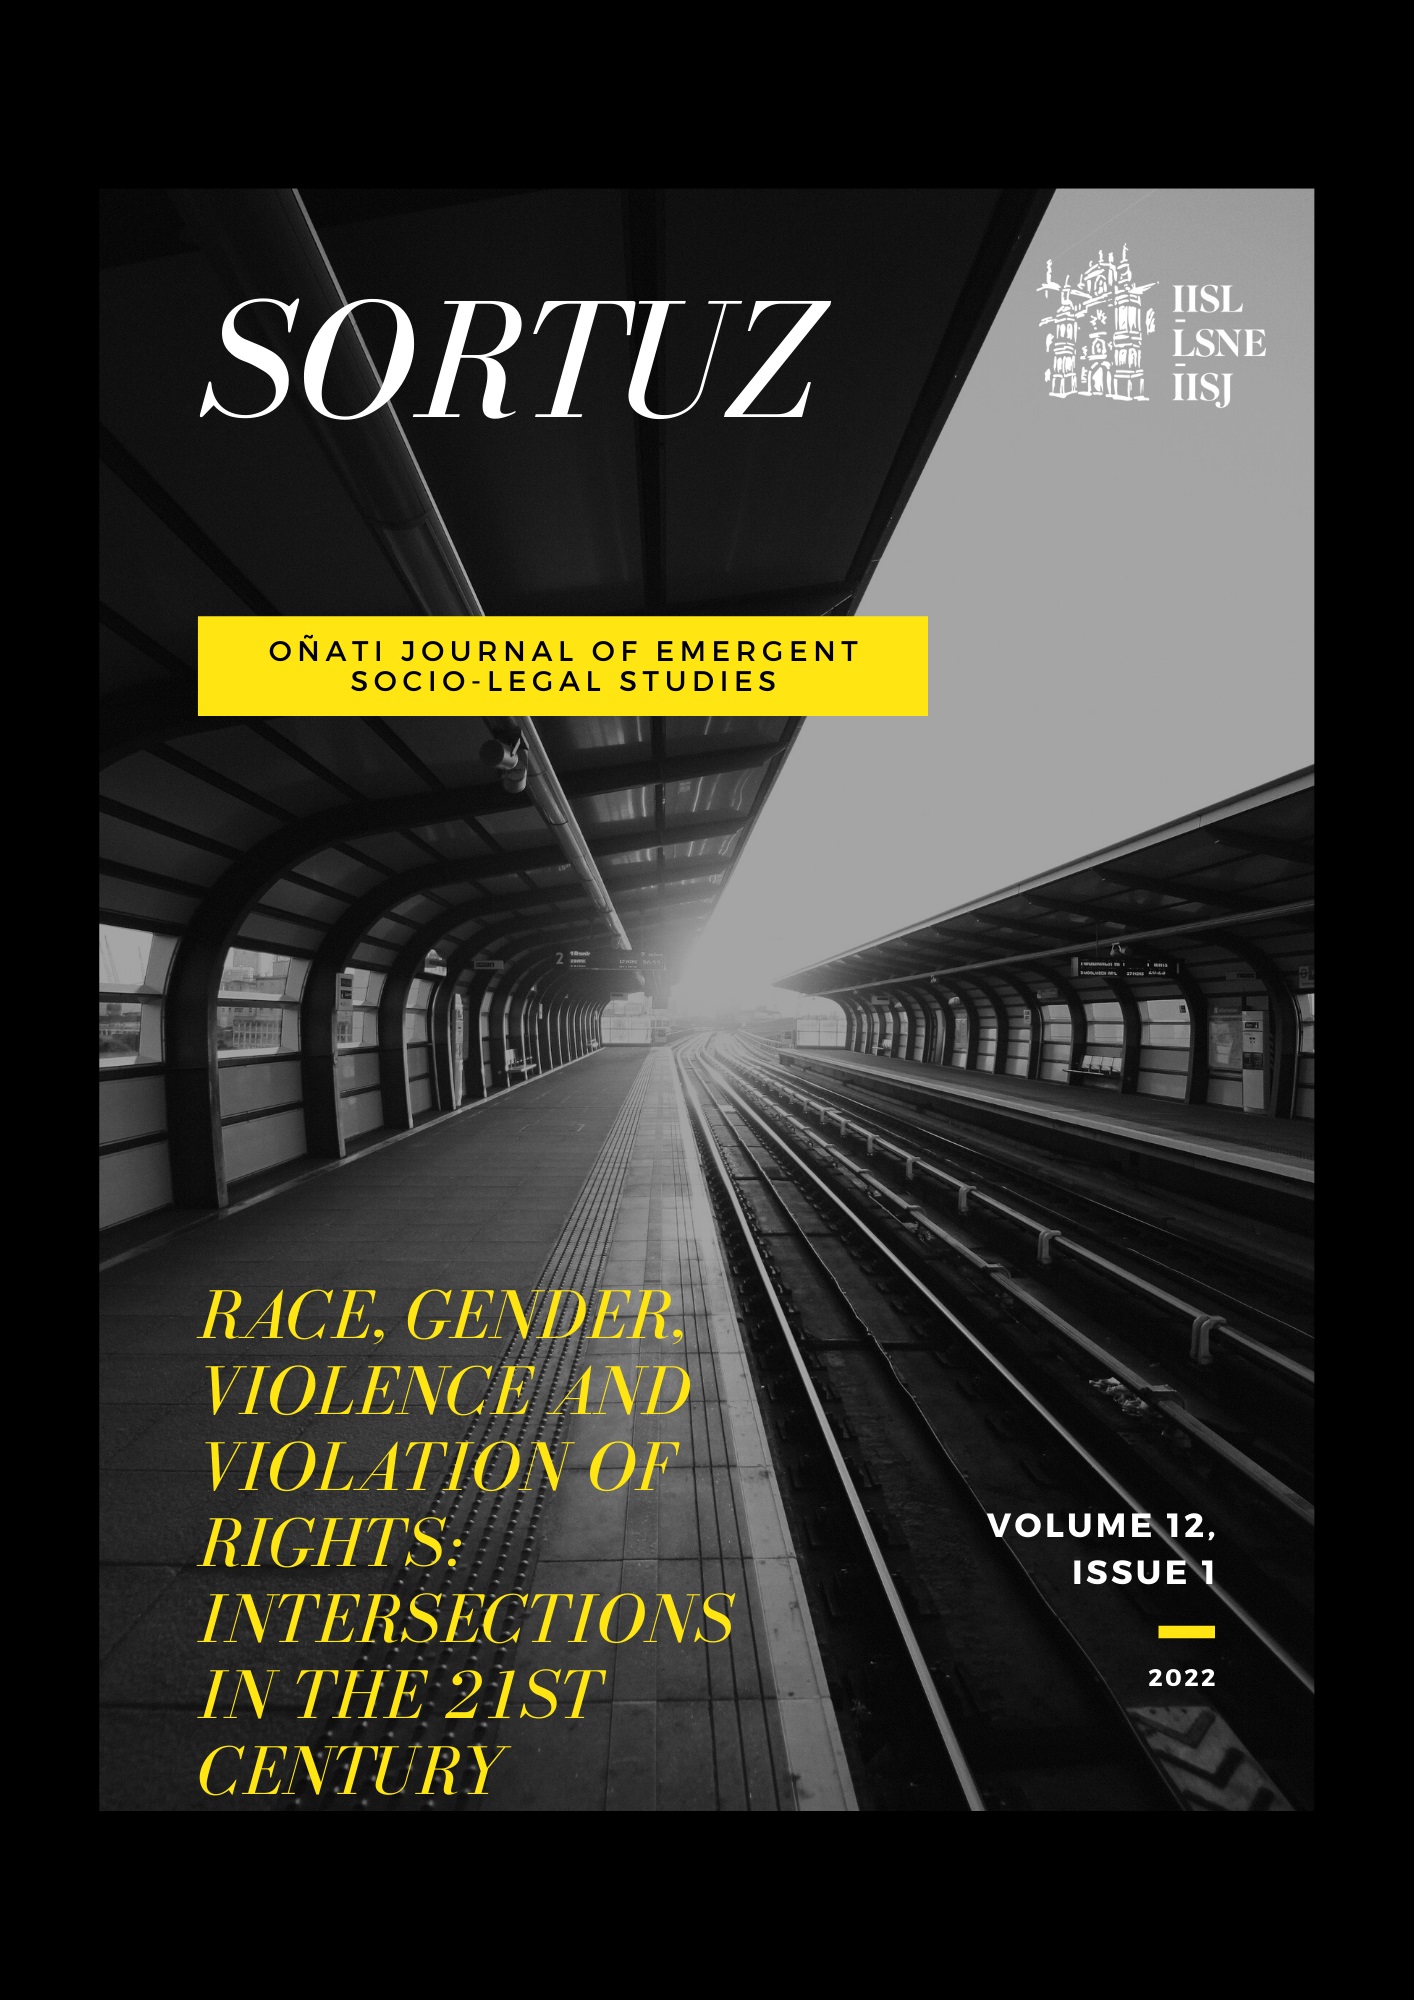 Cover of Sortuz 12(1) - Race, gender, violence and violation of rights: Intersections in the 21st Century